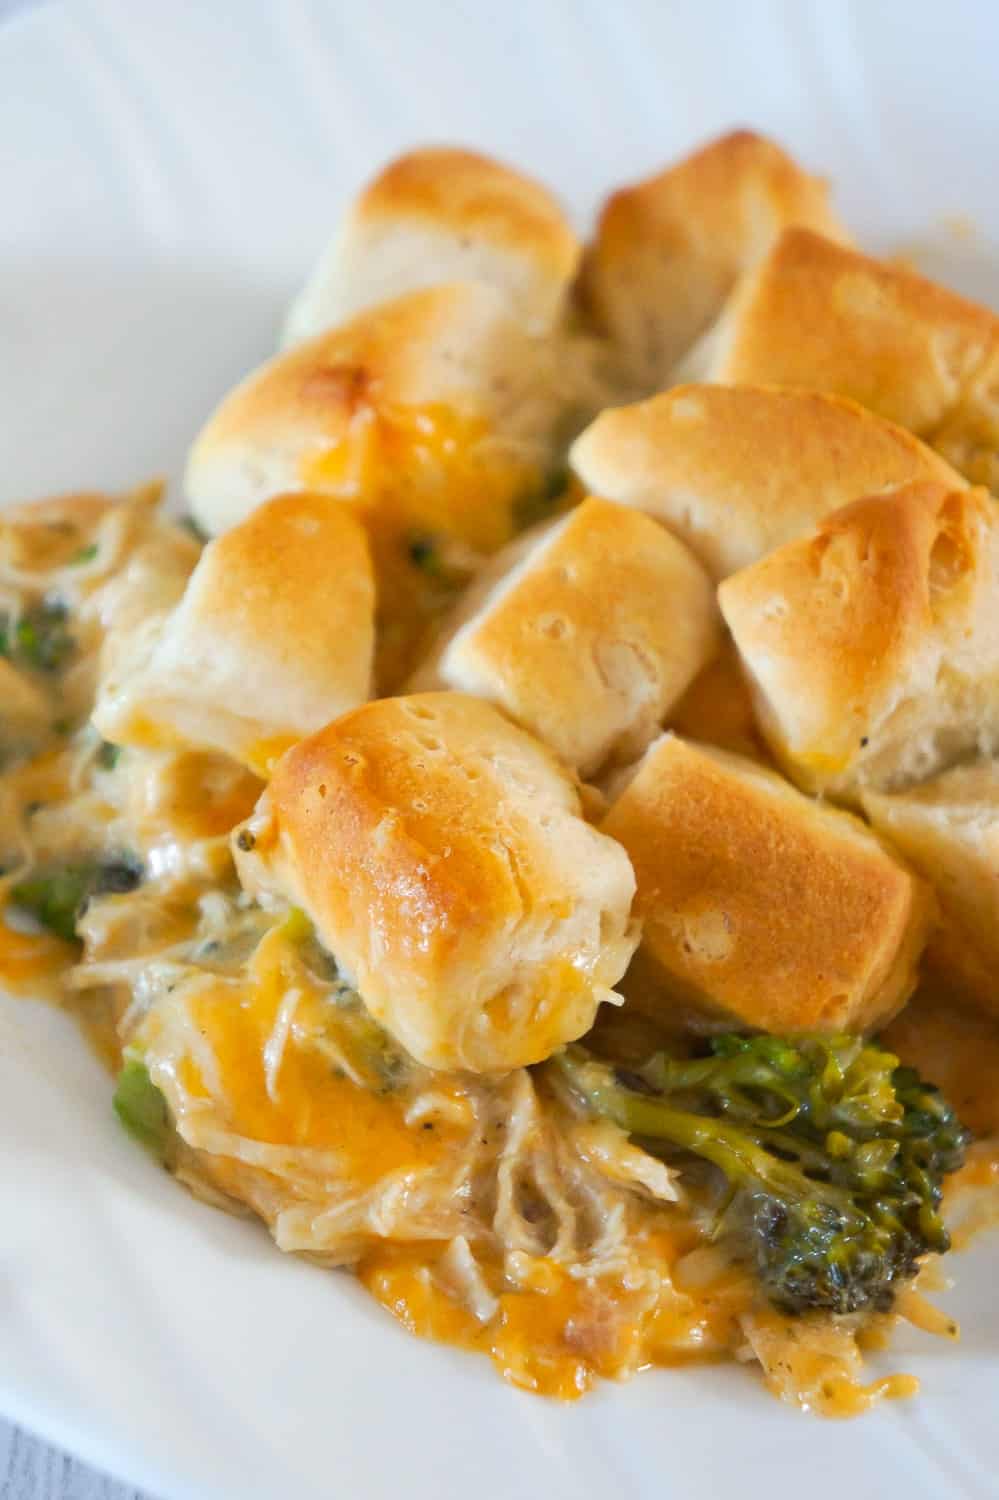 Chicken Casserole with Broccoli and Biscuits is an easy chicken dinner recipe using shredded chicken and Pillsbury biscuits. These creamy chicken casserole is loaded with broccoli and cheddar cheese.